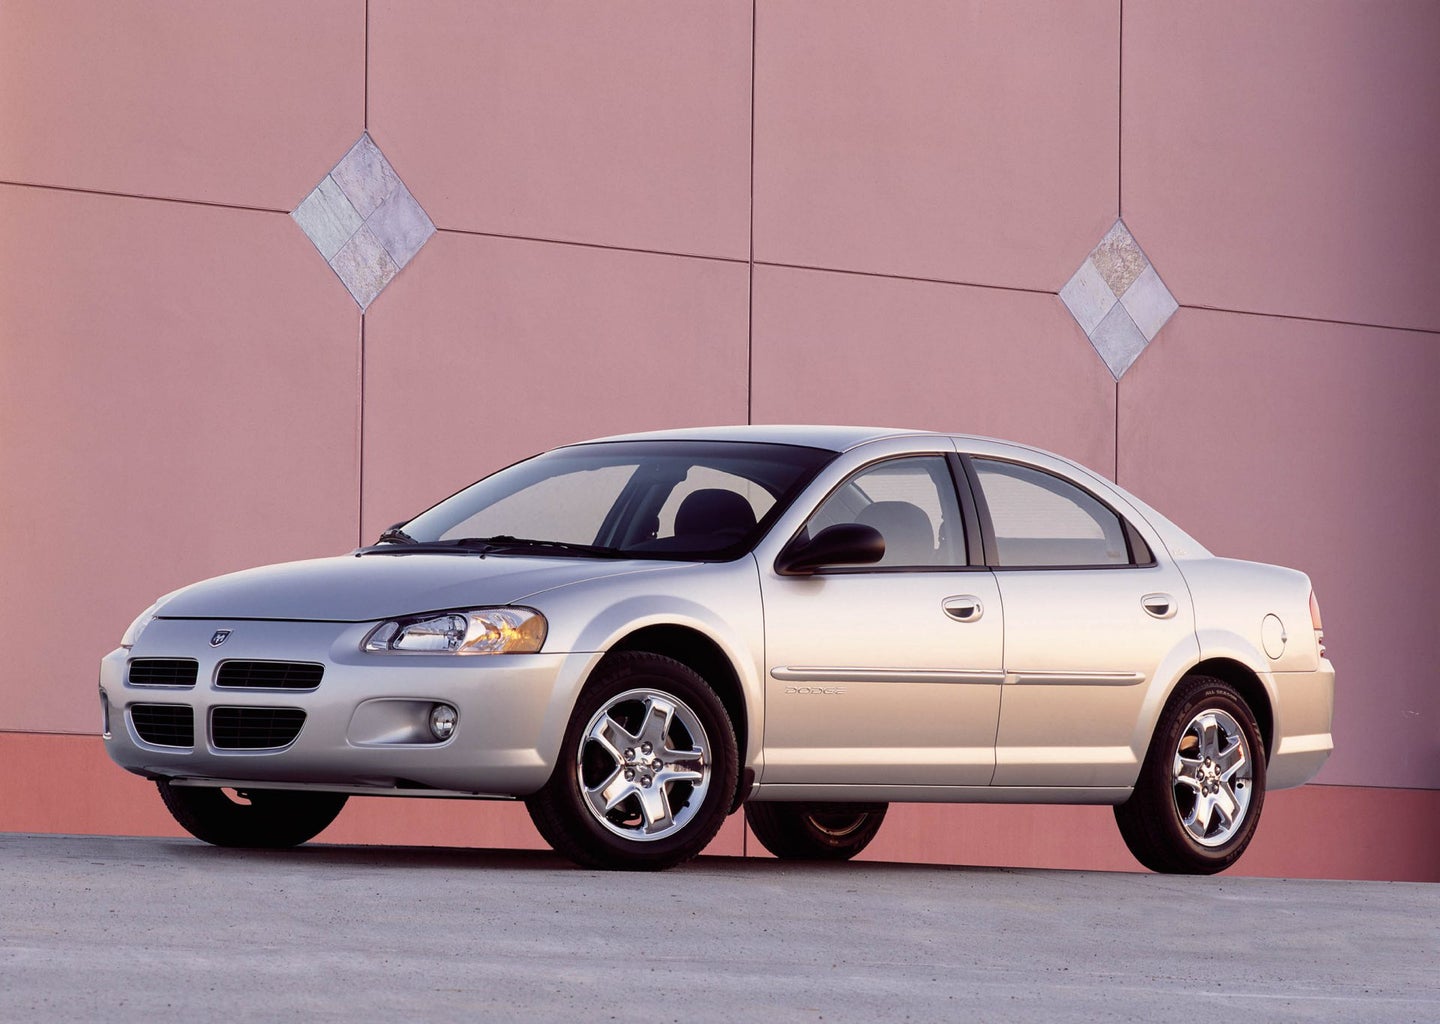 Bid Now to Take Home Most of a 2005 Dodge Stratus